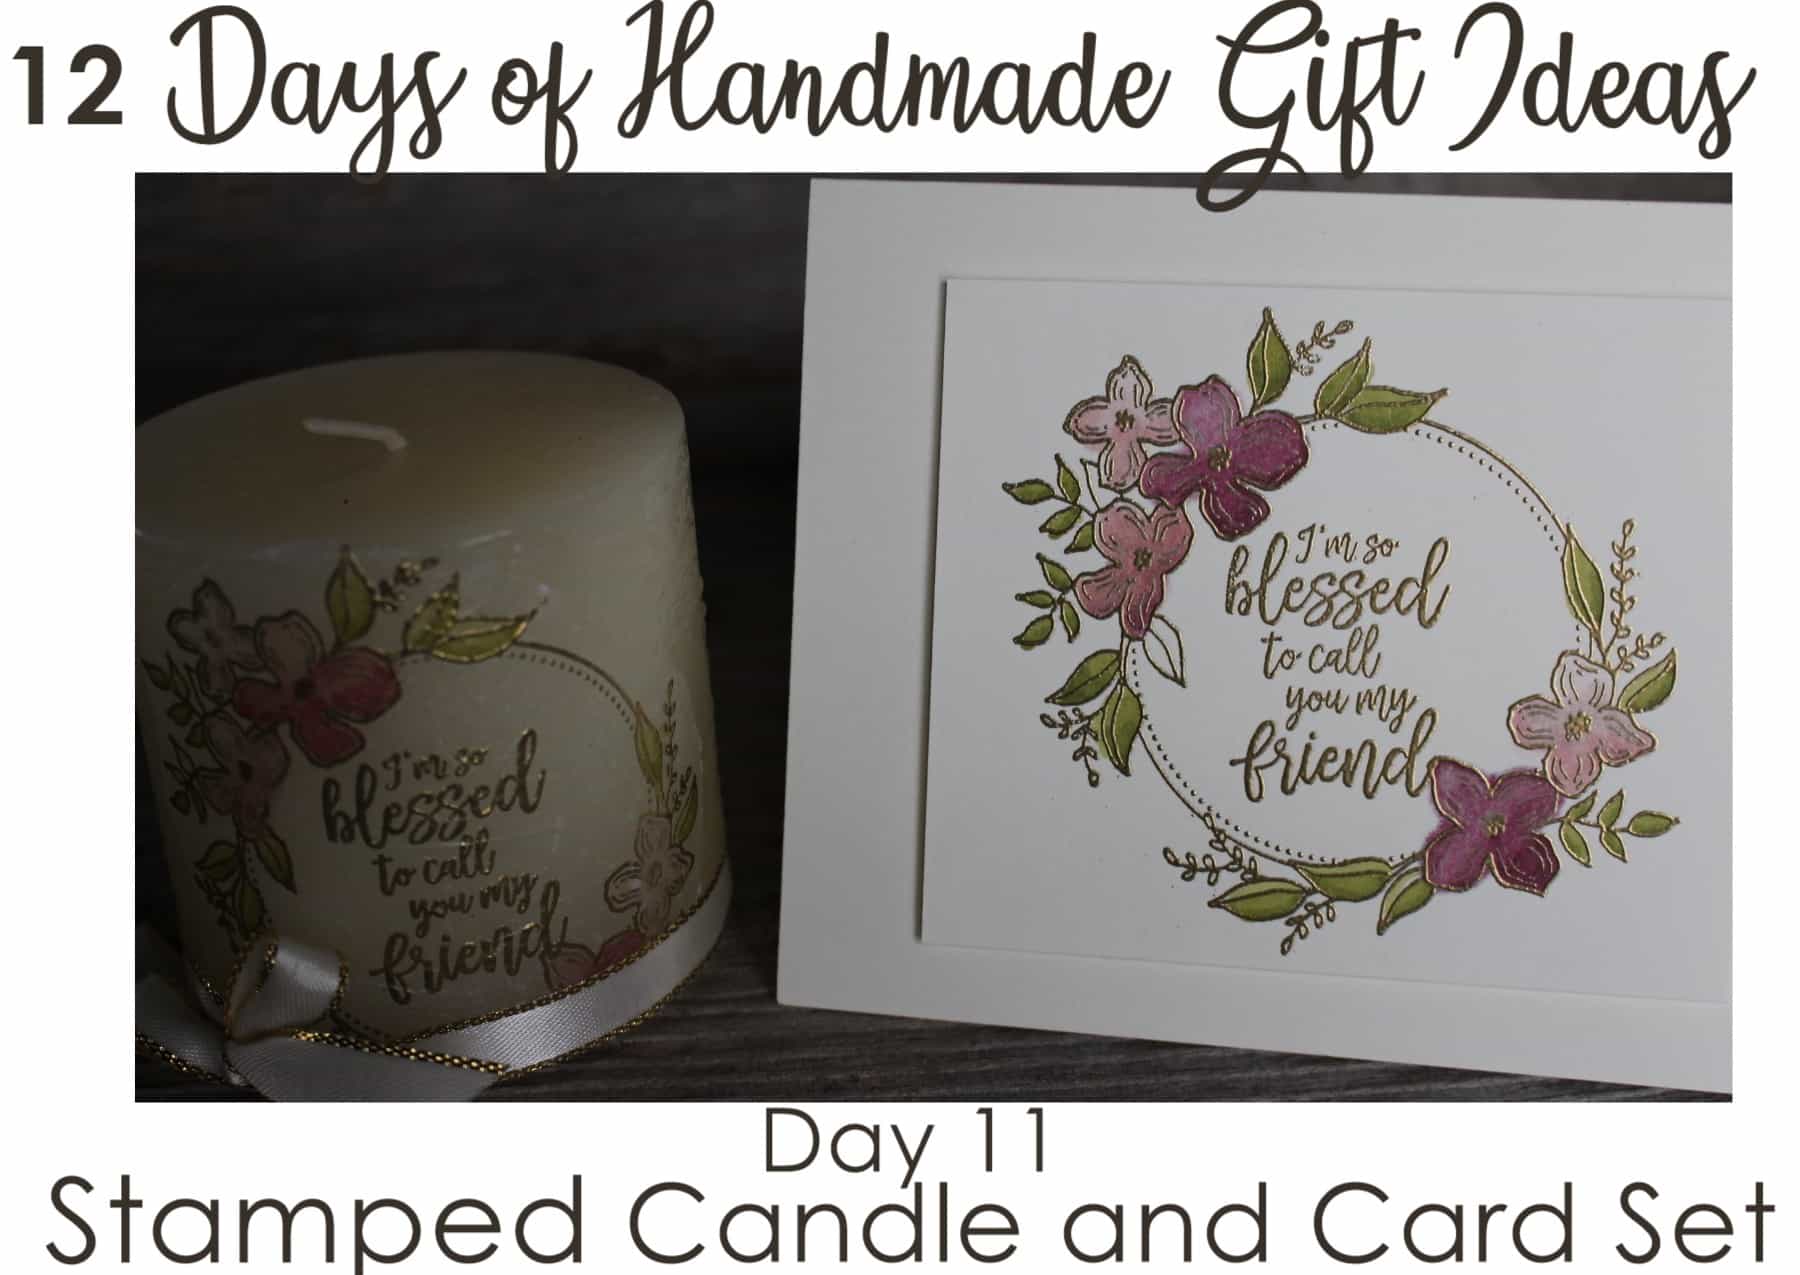 12 Days of Handmade Gift Ideas – Day 11 Stamped Candle and Card Set